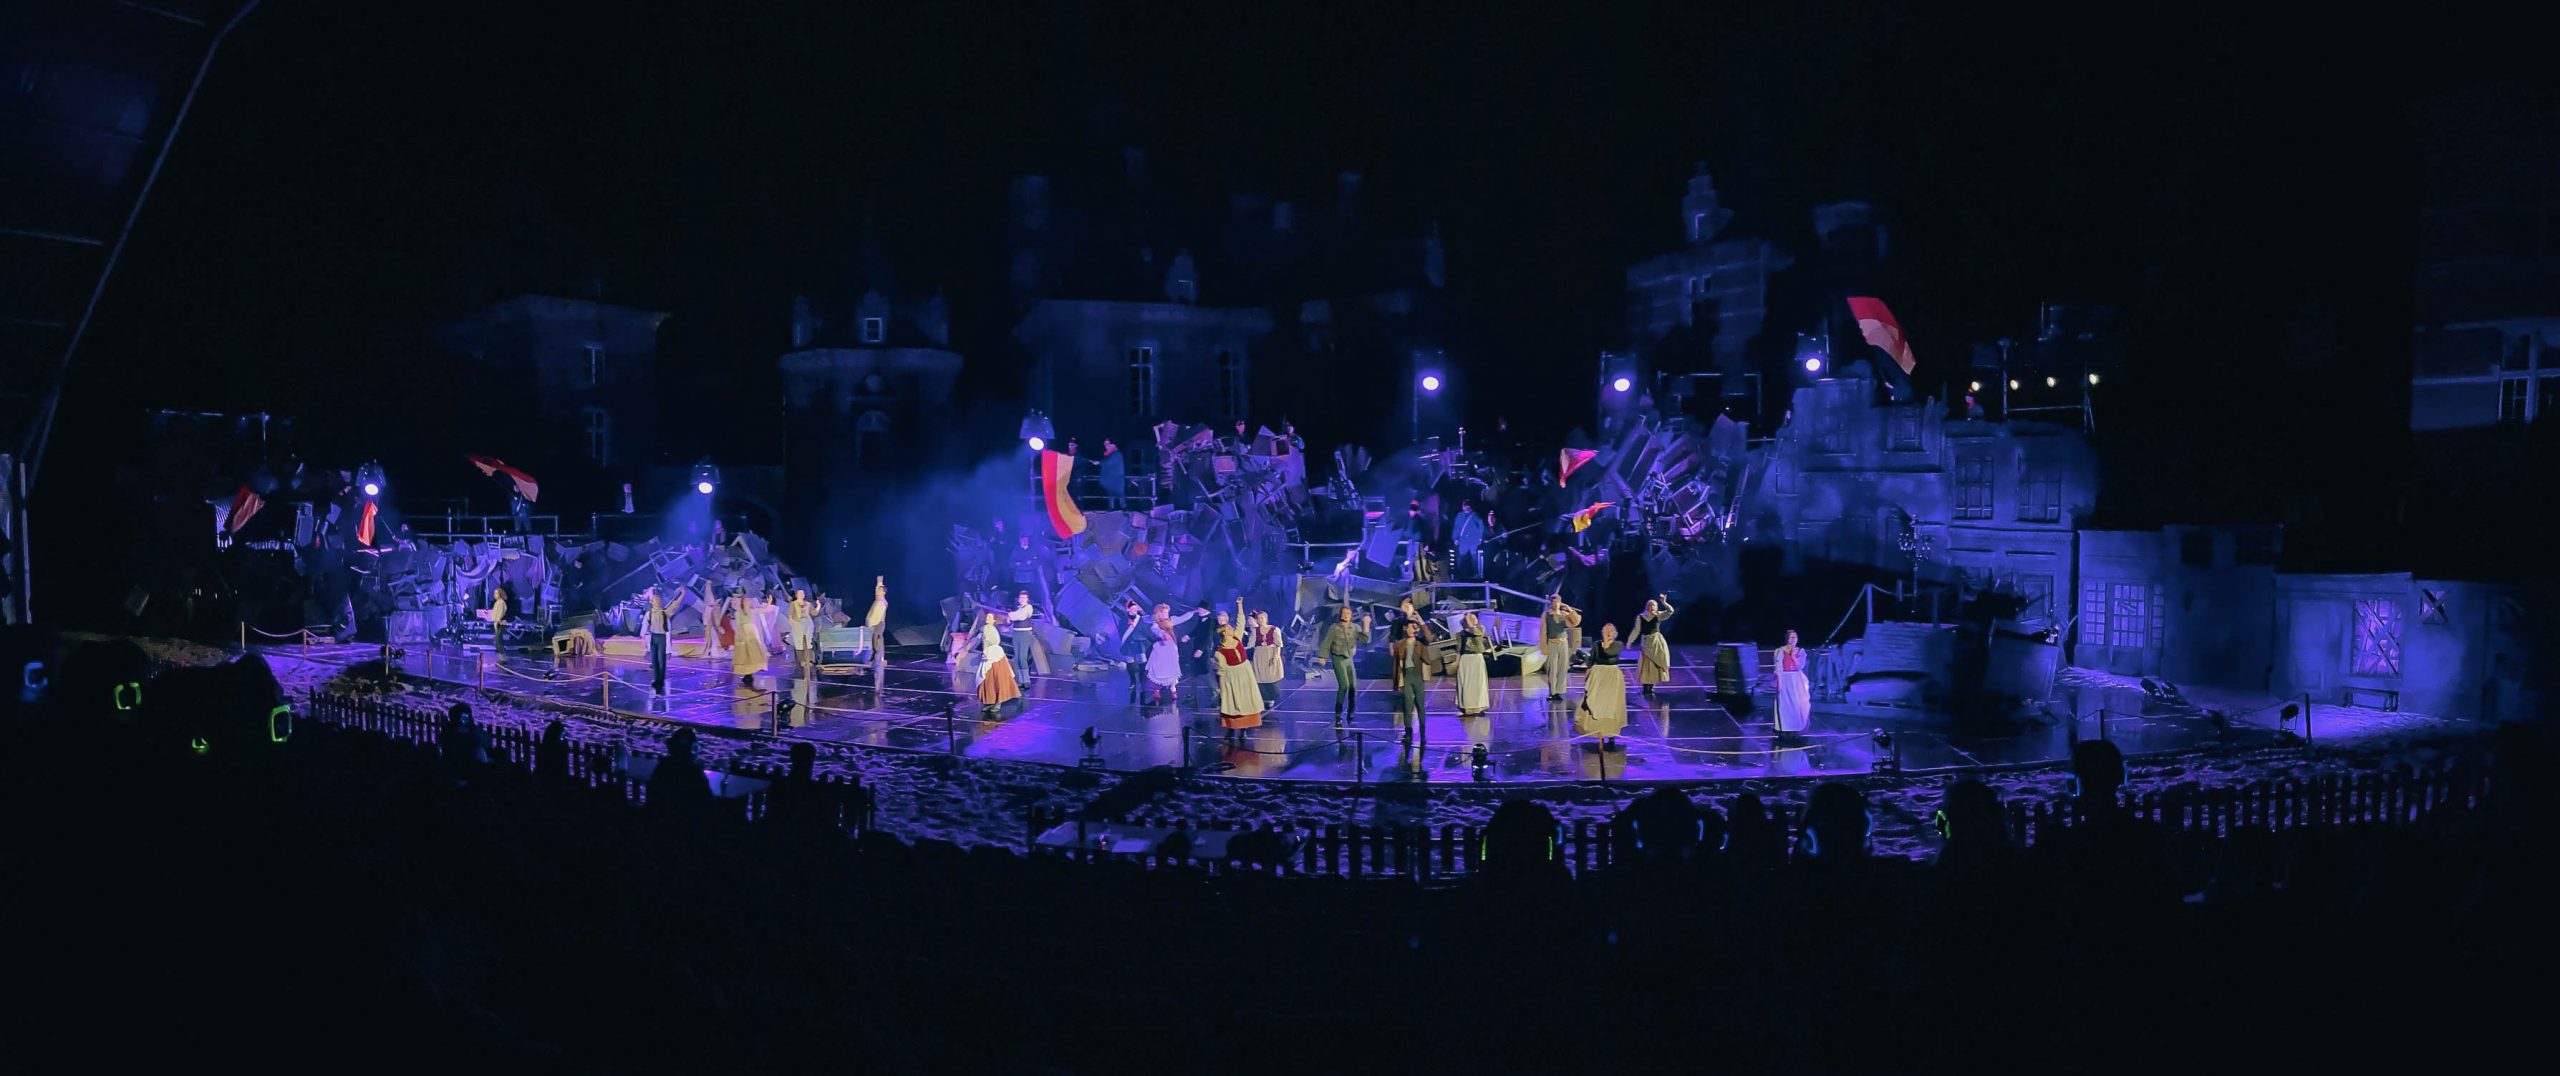 Impressive Musical '1830' On Castle Domain With dLive & Waves System Event Players 8